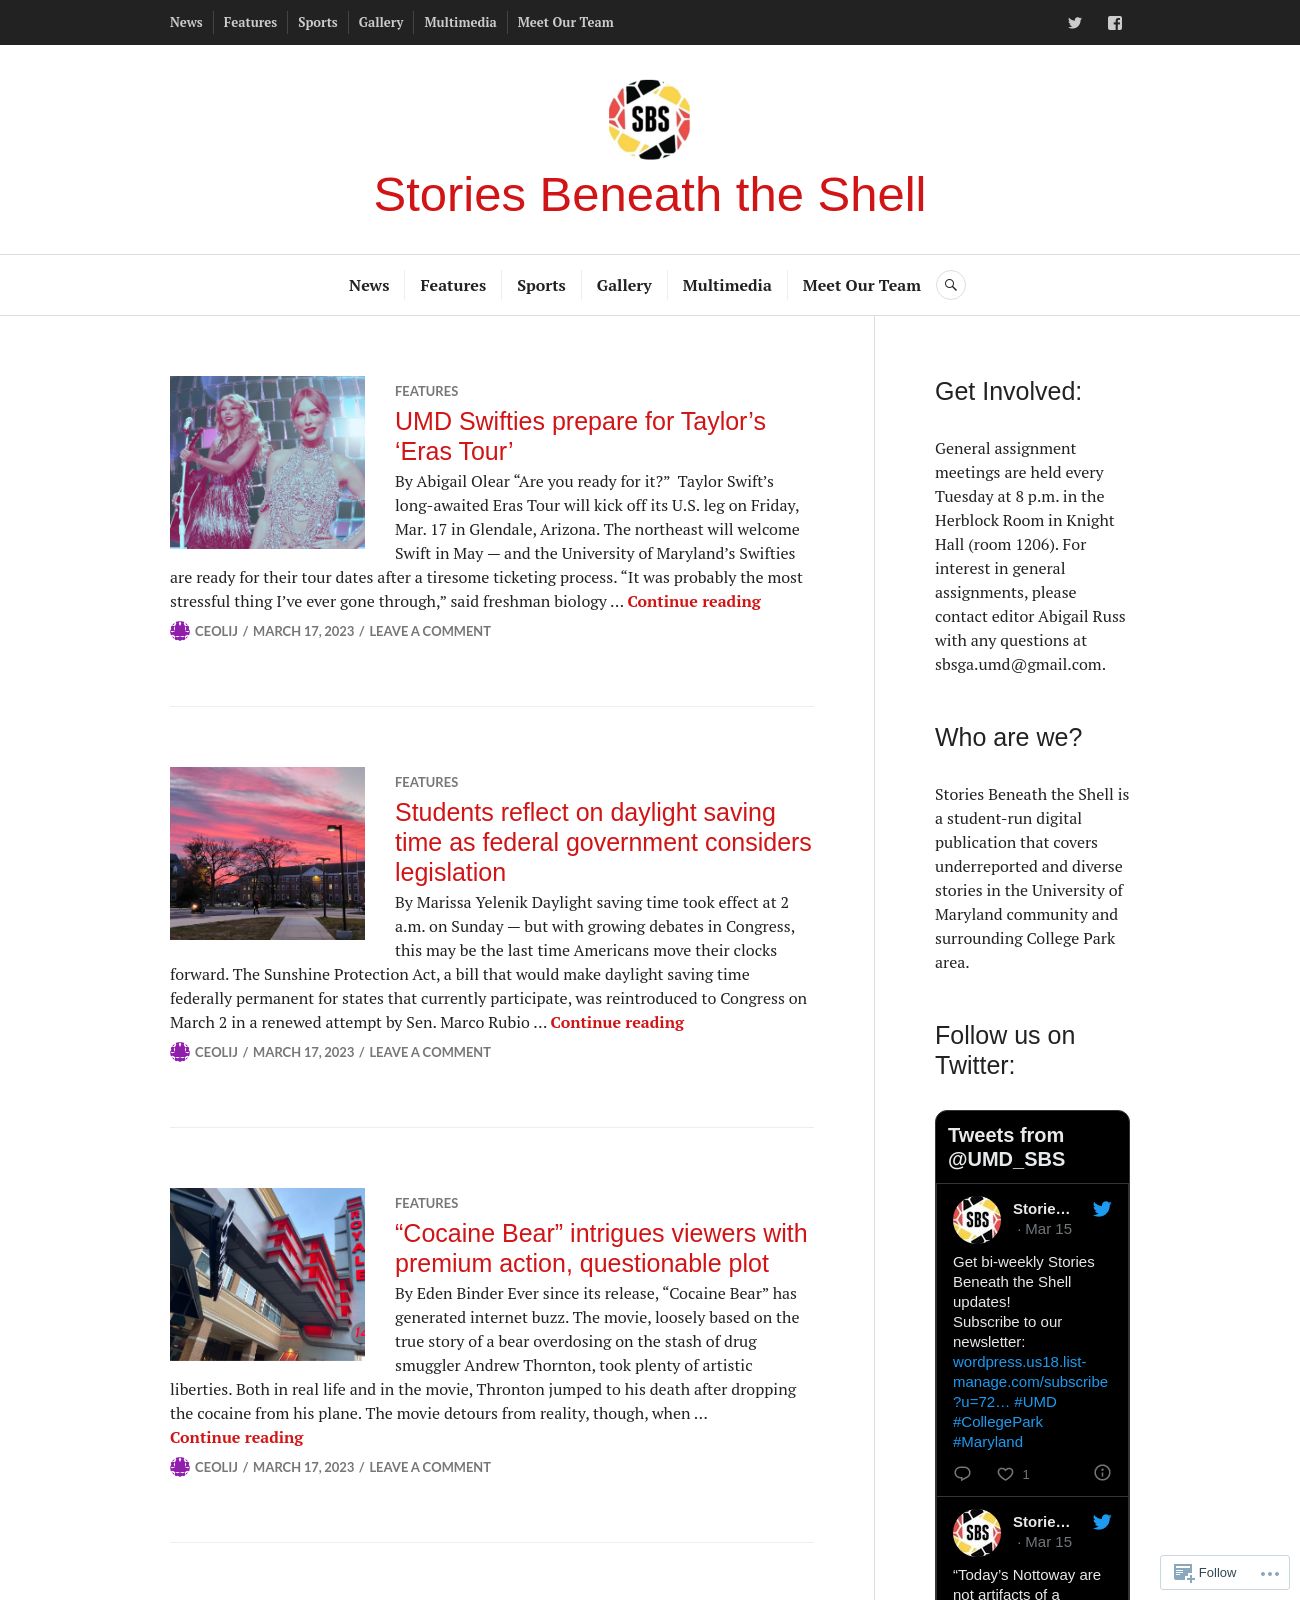 Stories Beneath the Shell at 2023-03-18 08:28:52-04:00 local time